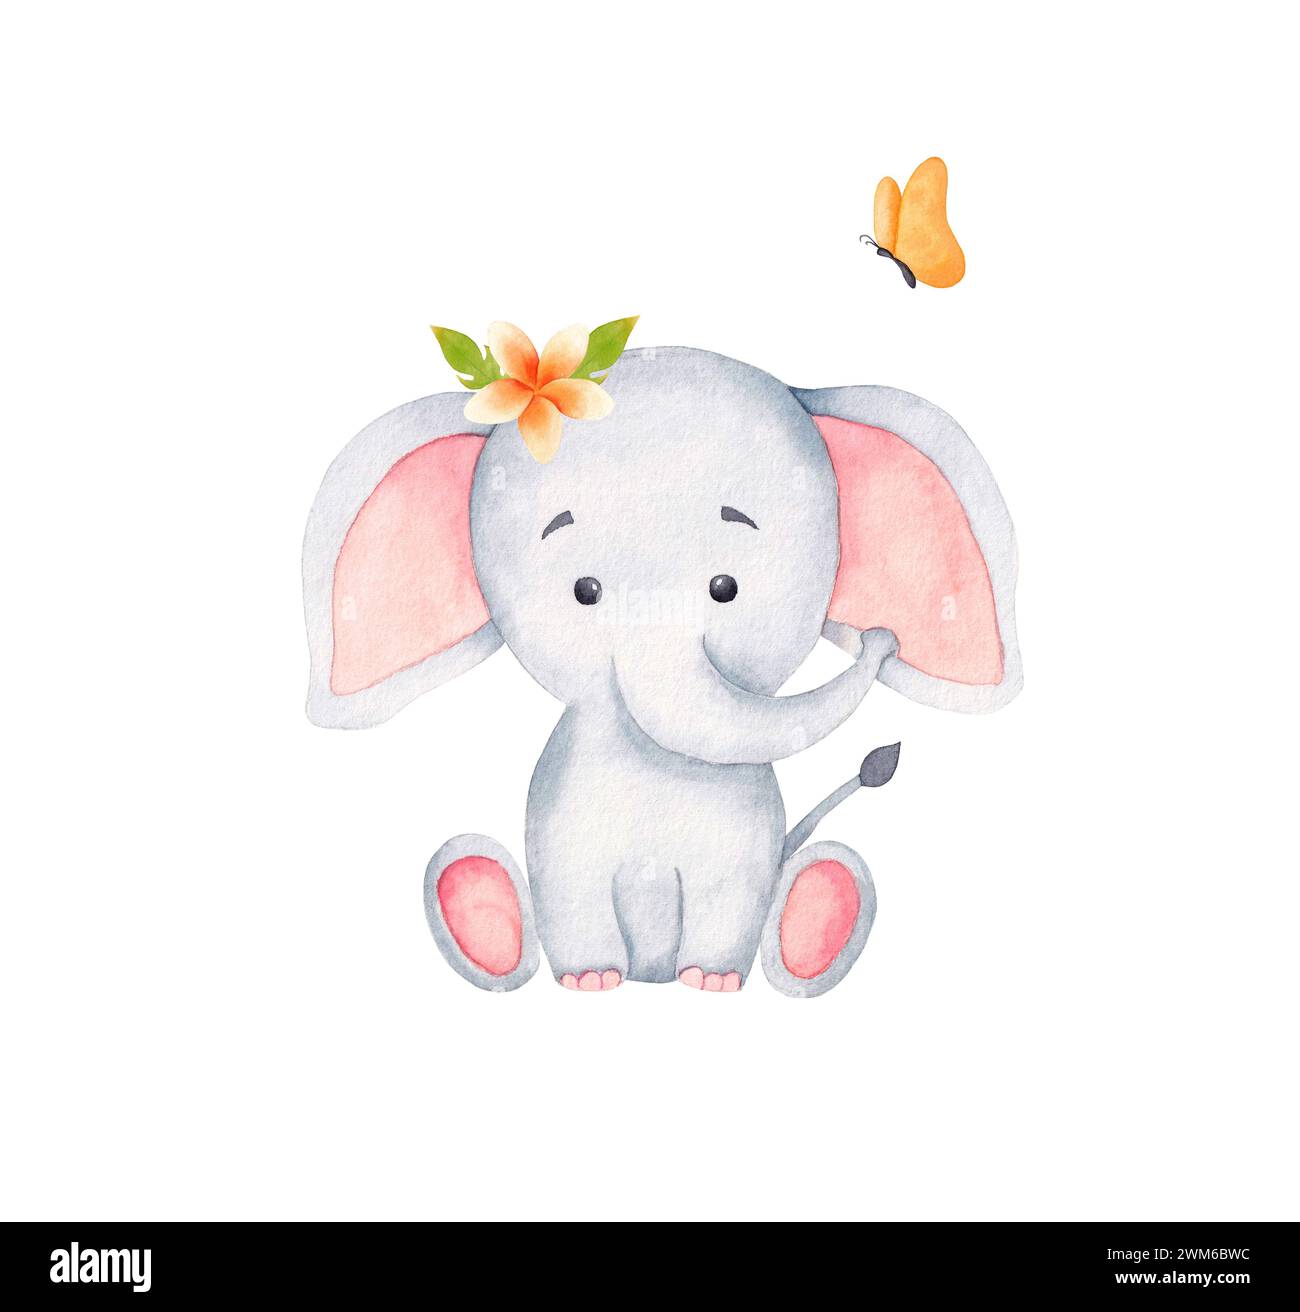 Cute baby elephant. Watercolor hand drawn illustration, isolated on white background. African baby animal children's parties. Stock Photo